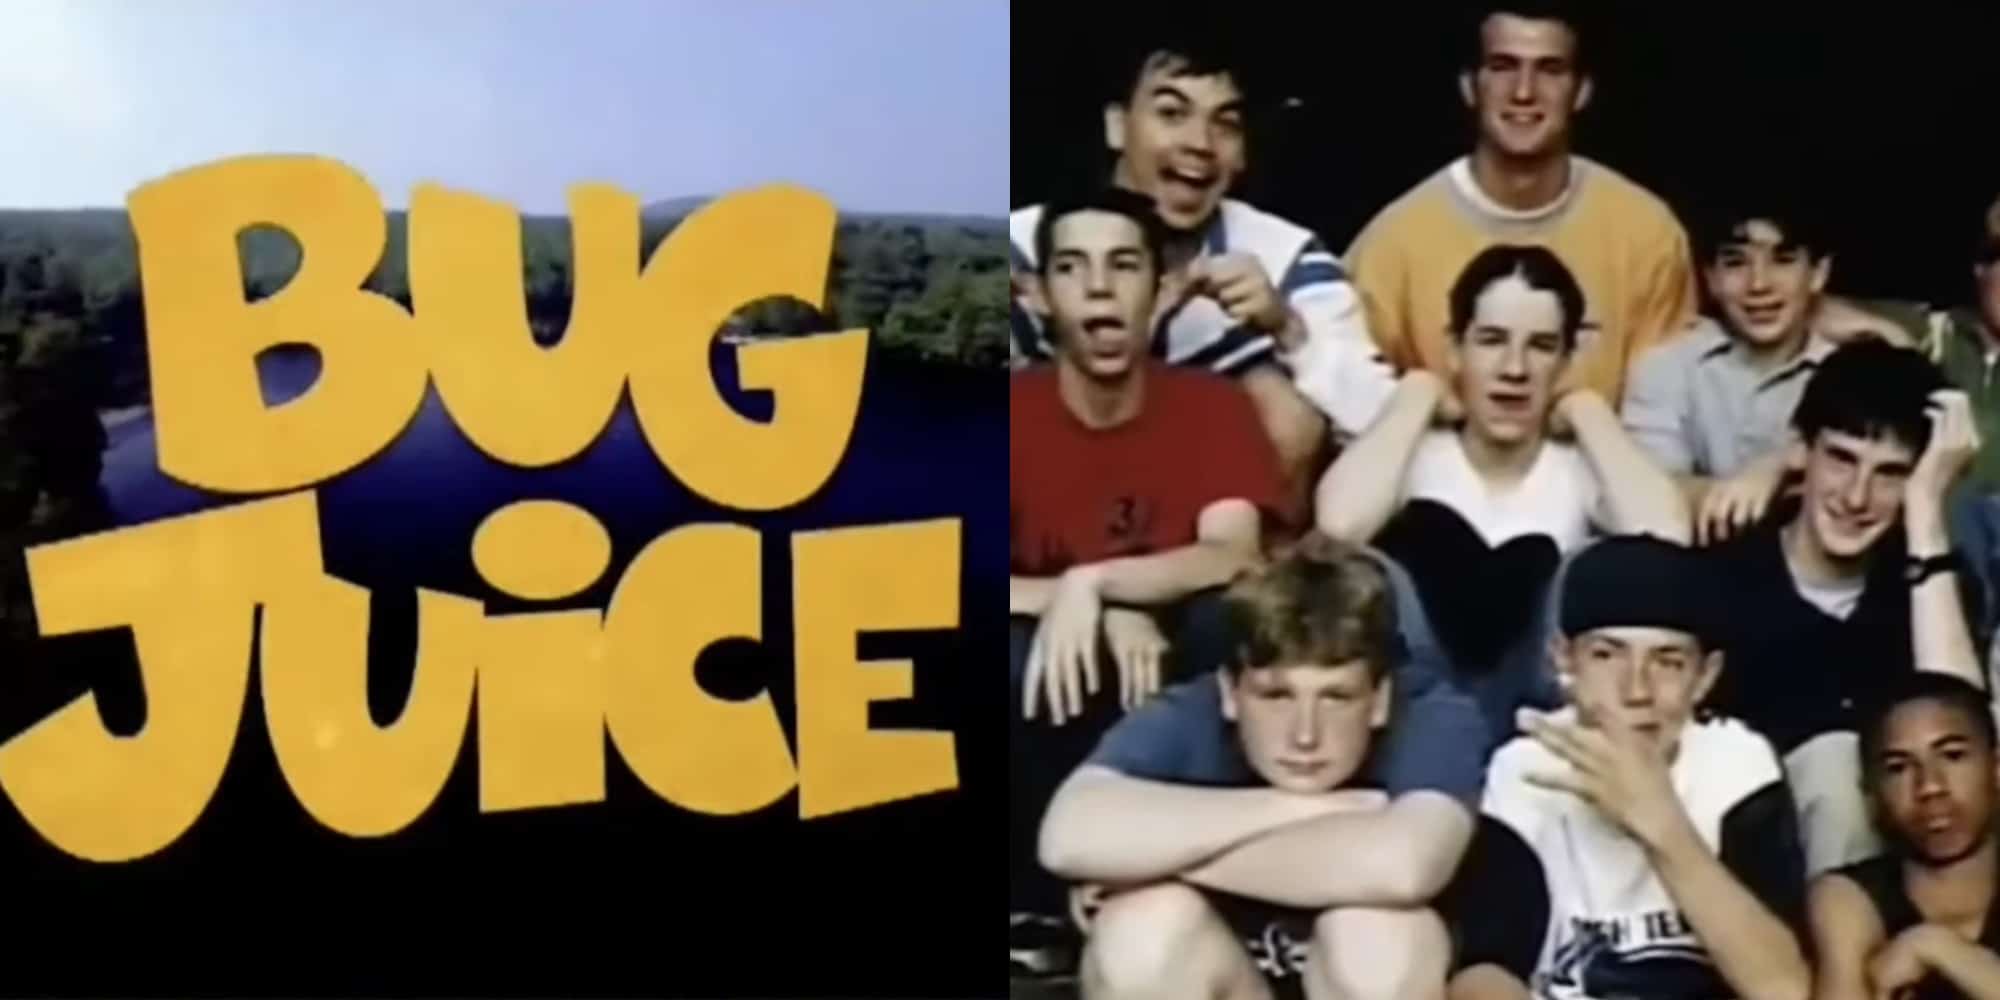 What Happened To Bug Juice?